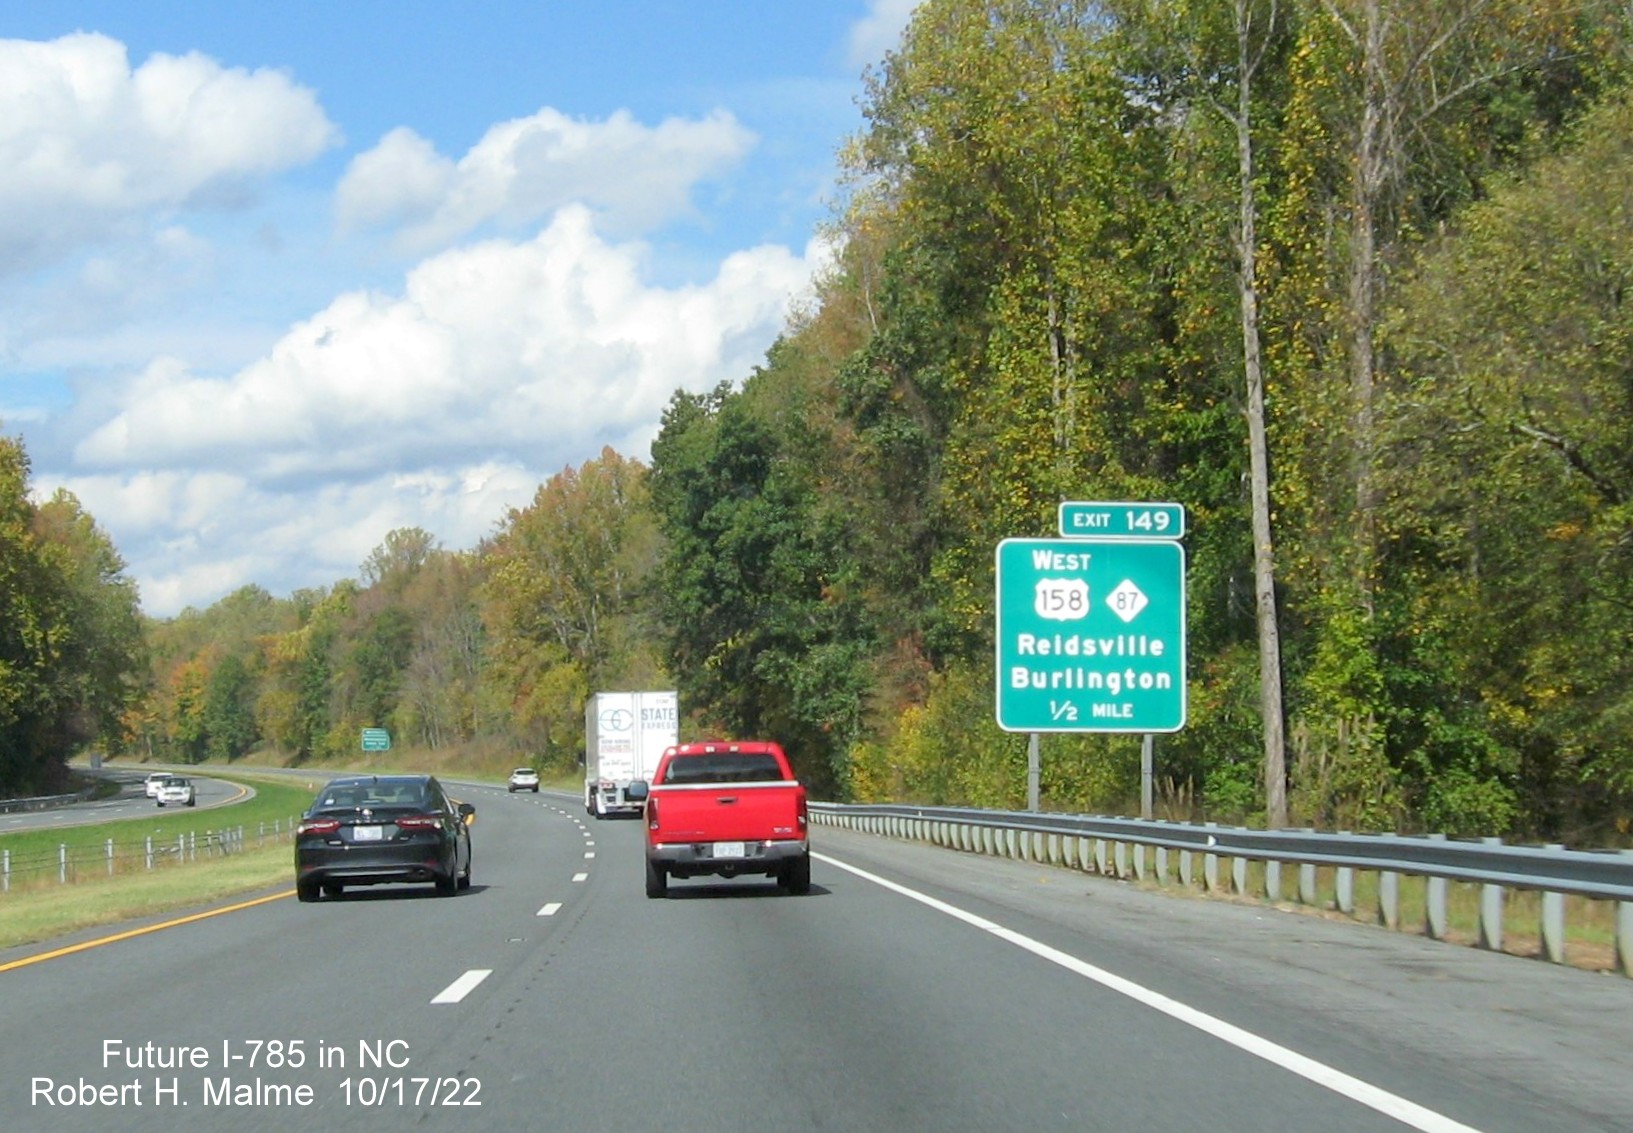 Image of 1/2 mile advance sign for West US 158/NC 87 exit on US 29 (Future I-785) North in Reidsville, October 2022